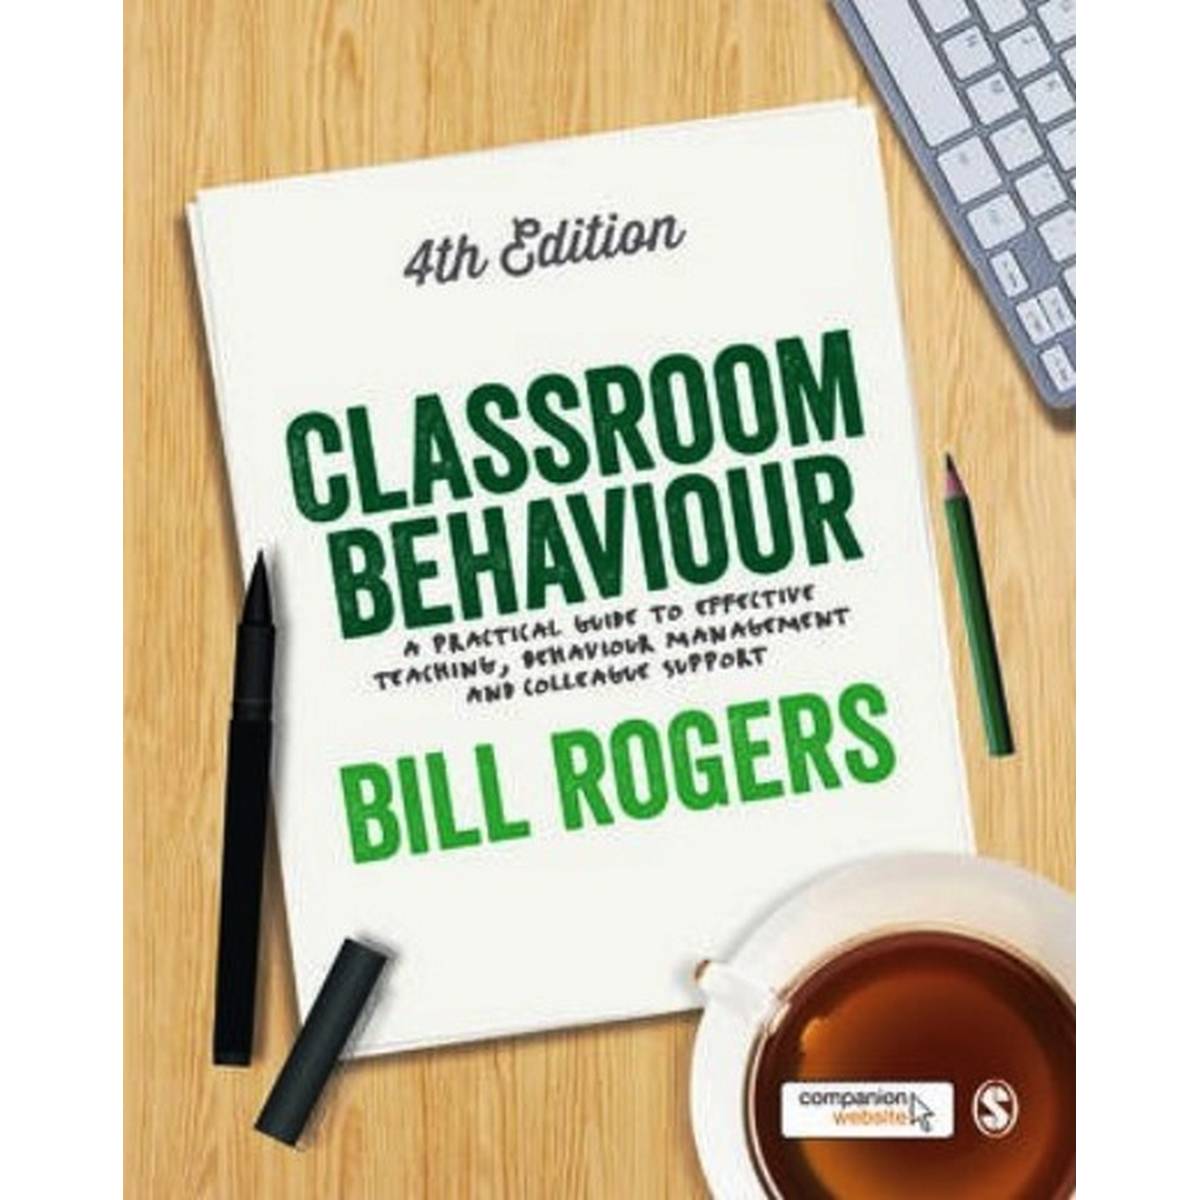 Classroom Behaviour: A Practical Guide to Effective Teaching, Behaviour Management and Colleague Support (4th Edition)